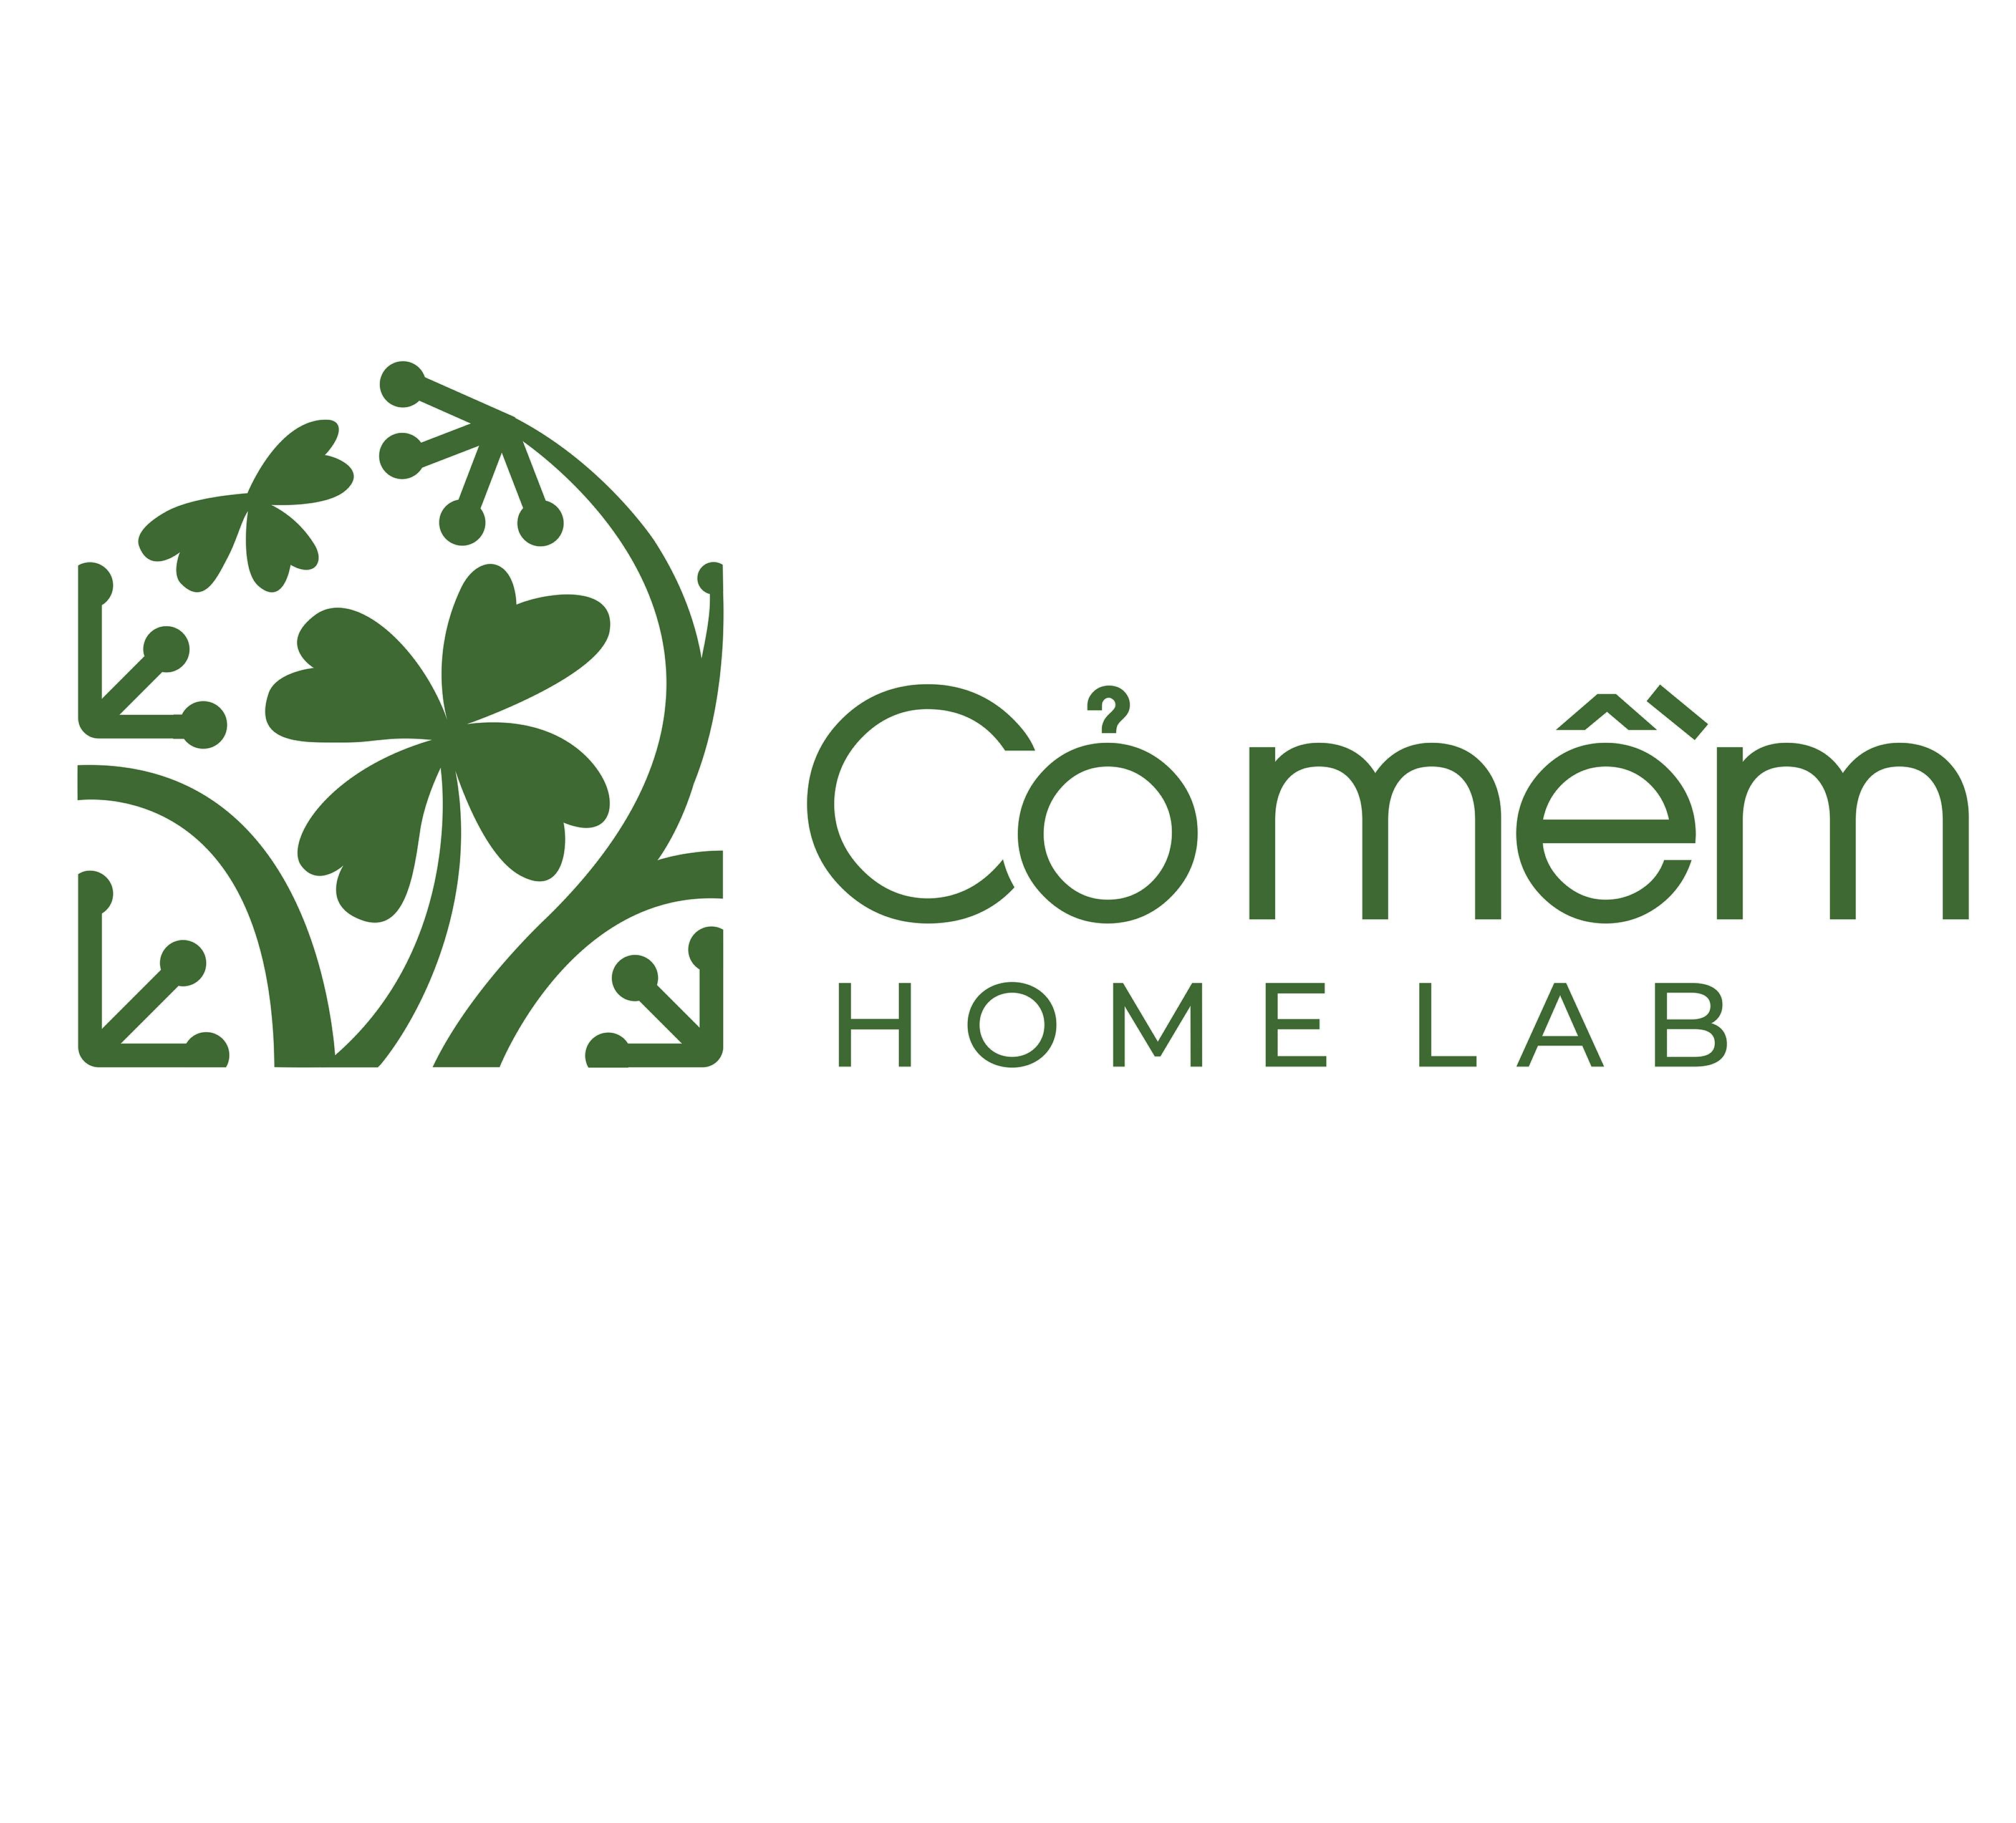 COMEM NATURAL COSMECEUTIC JOINT STOCK COMPANY